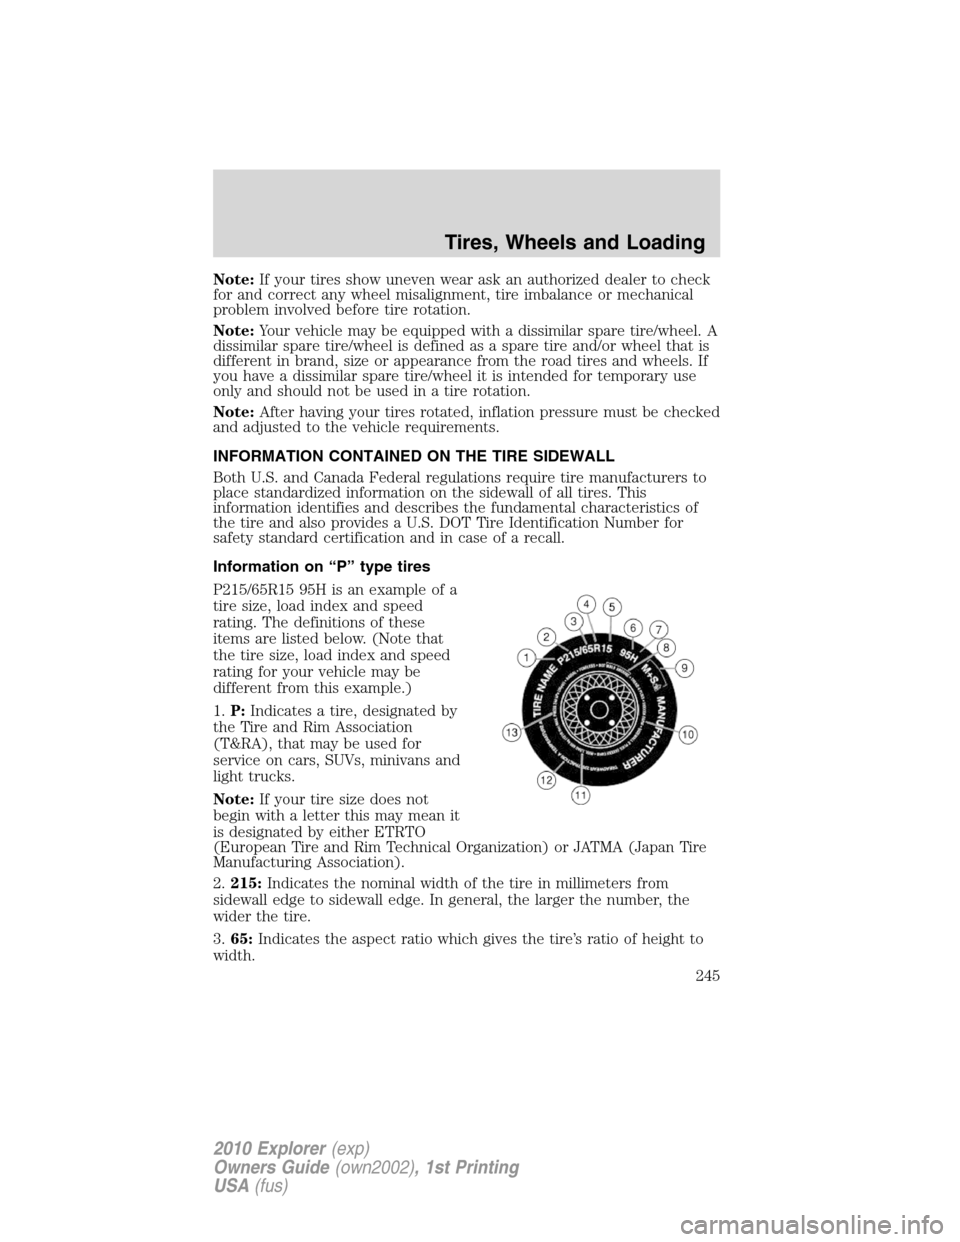 FORD EXPLORER 2010 4.G Owners Guide Note:If your tires show uneven wear ask an authorized dealer to check
for and correct any wheel misalignment, tire imbalance or mechanical
problem involved before tire rotation.
Note:Your vehicle may 